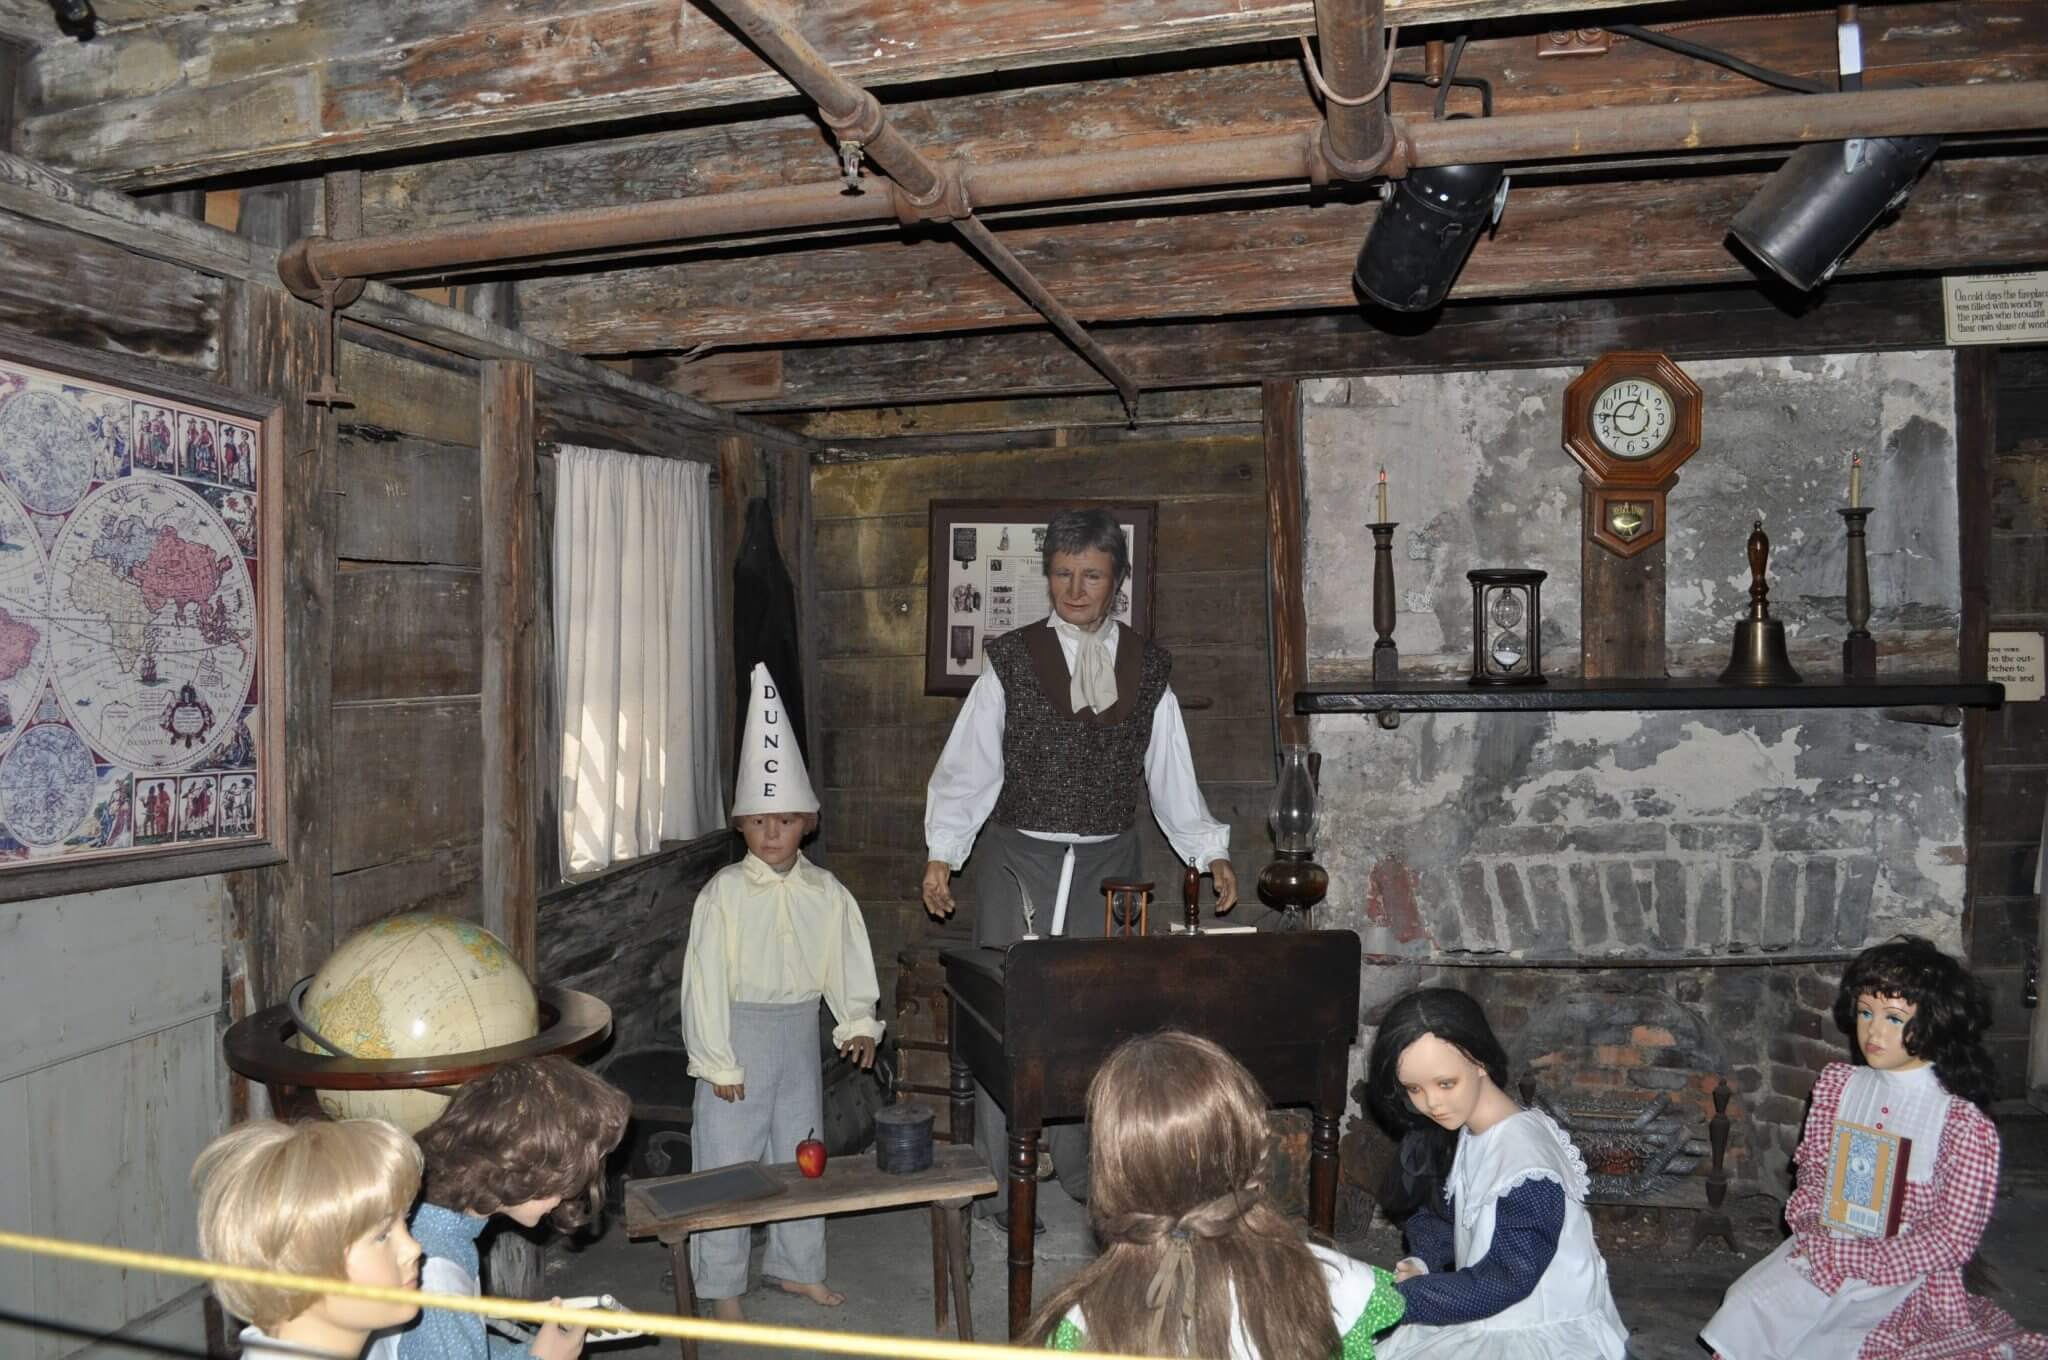 Oldest Wooden Schoolhouse in the United States